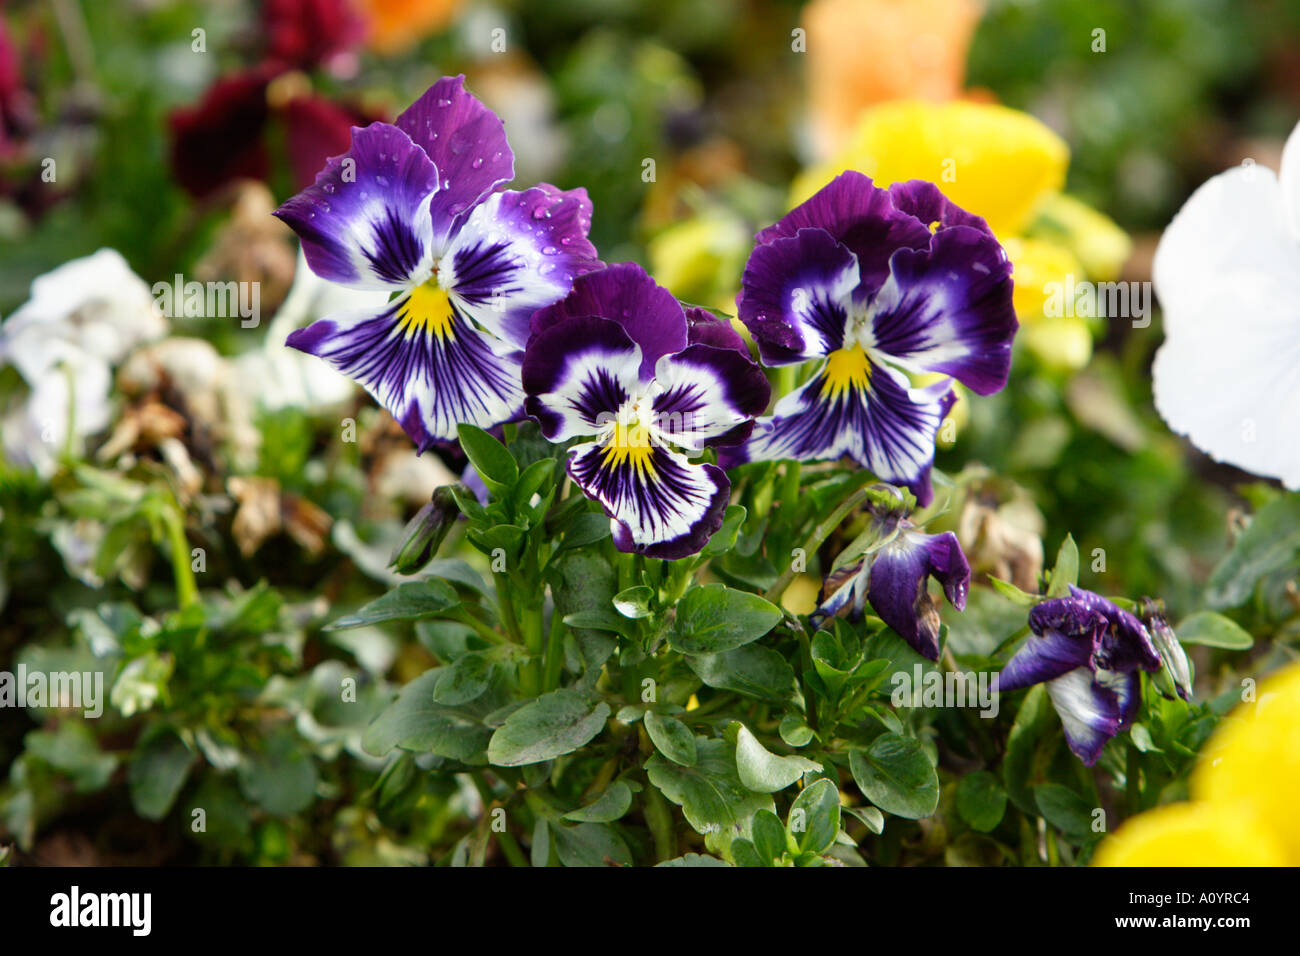 Colorful field of Pansies Stock Photo